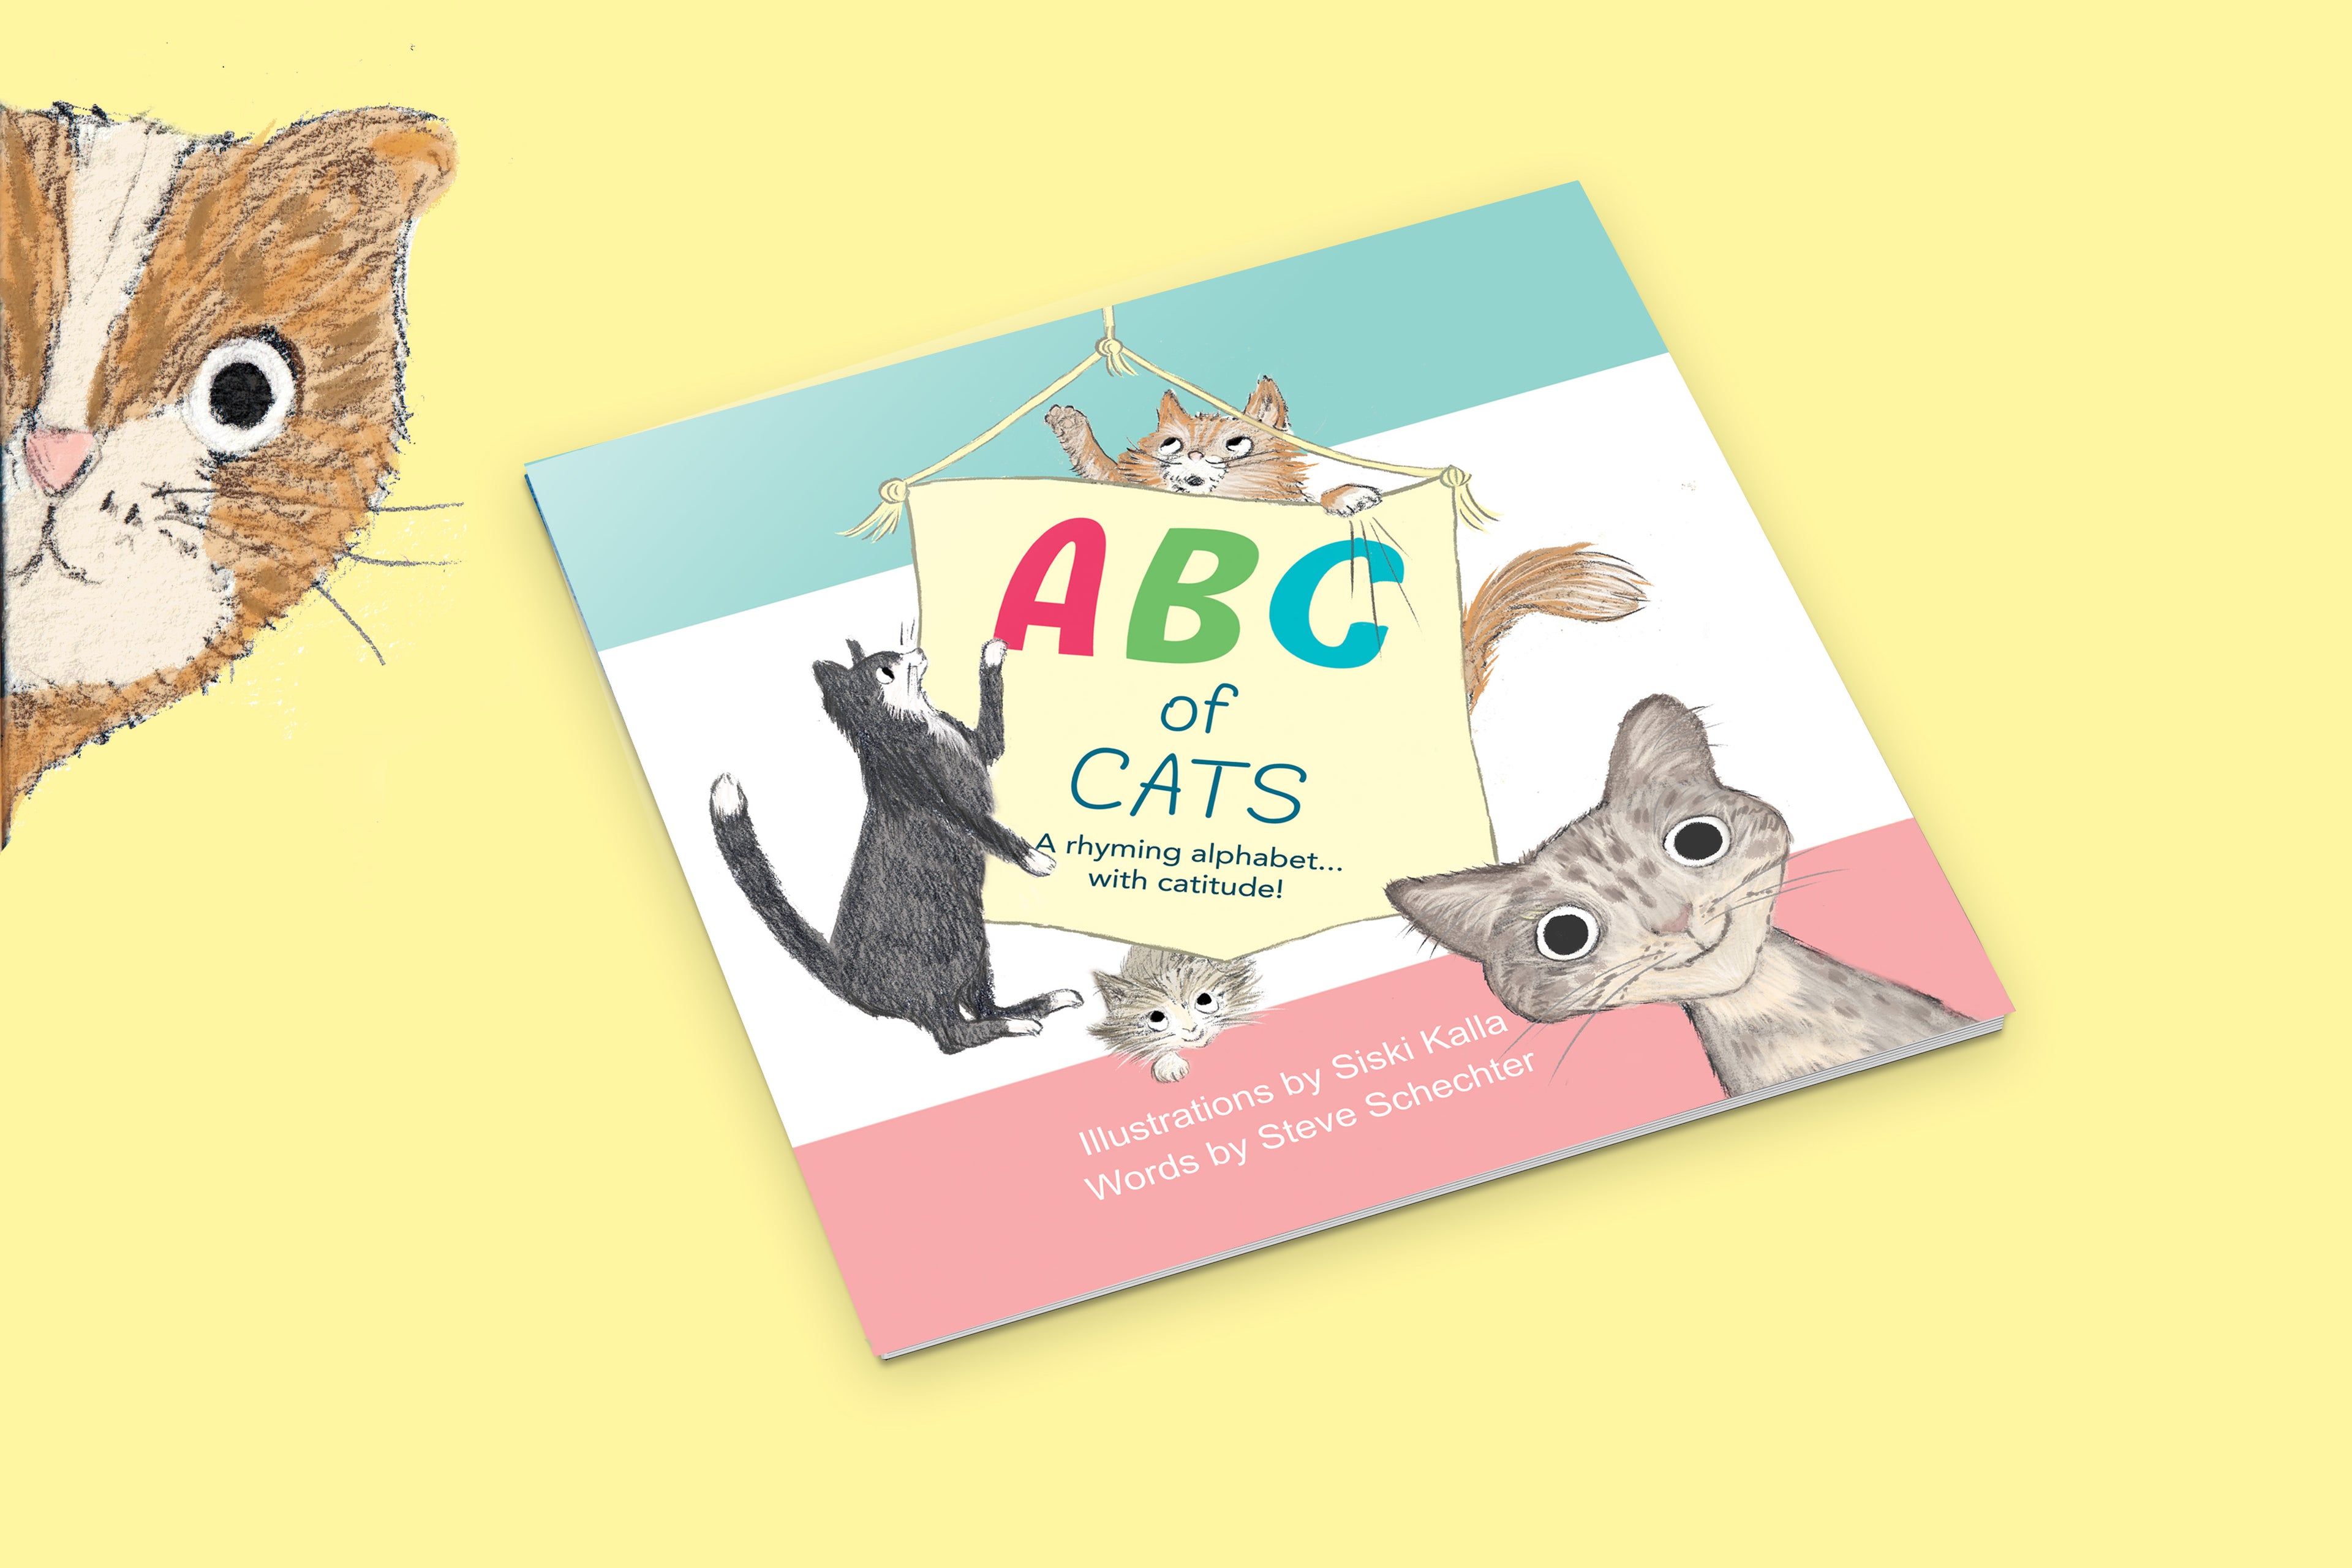 Cats ABC book cover